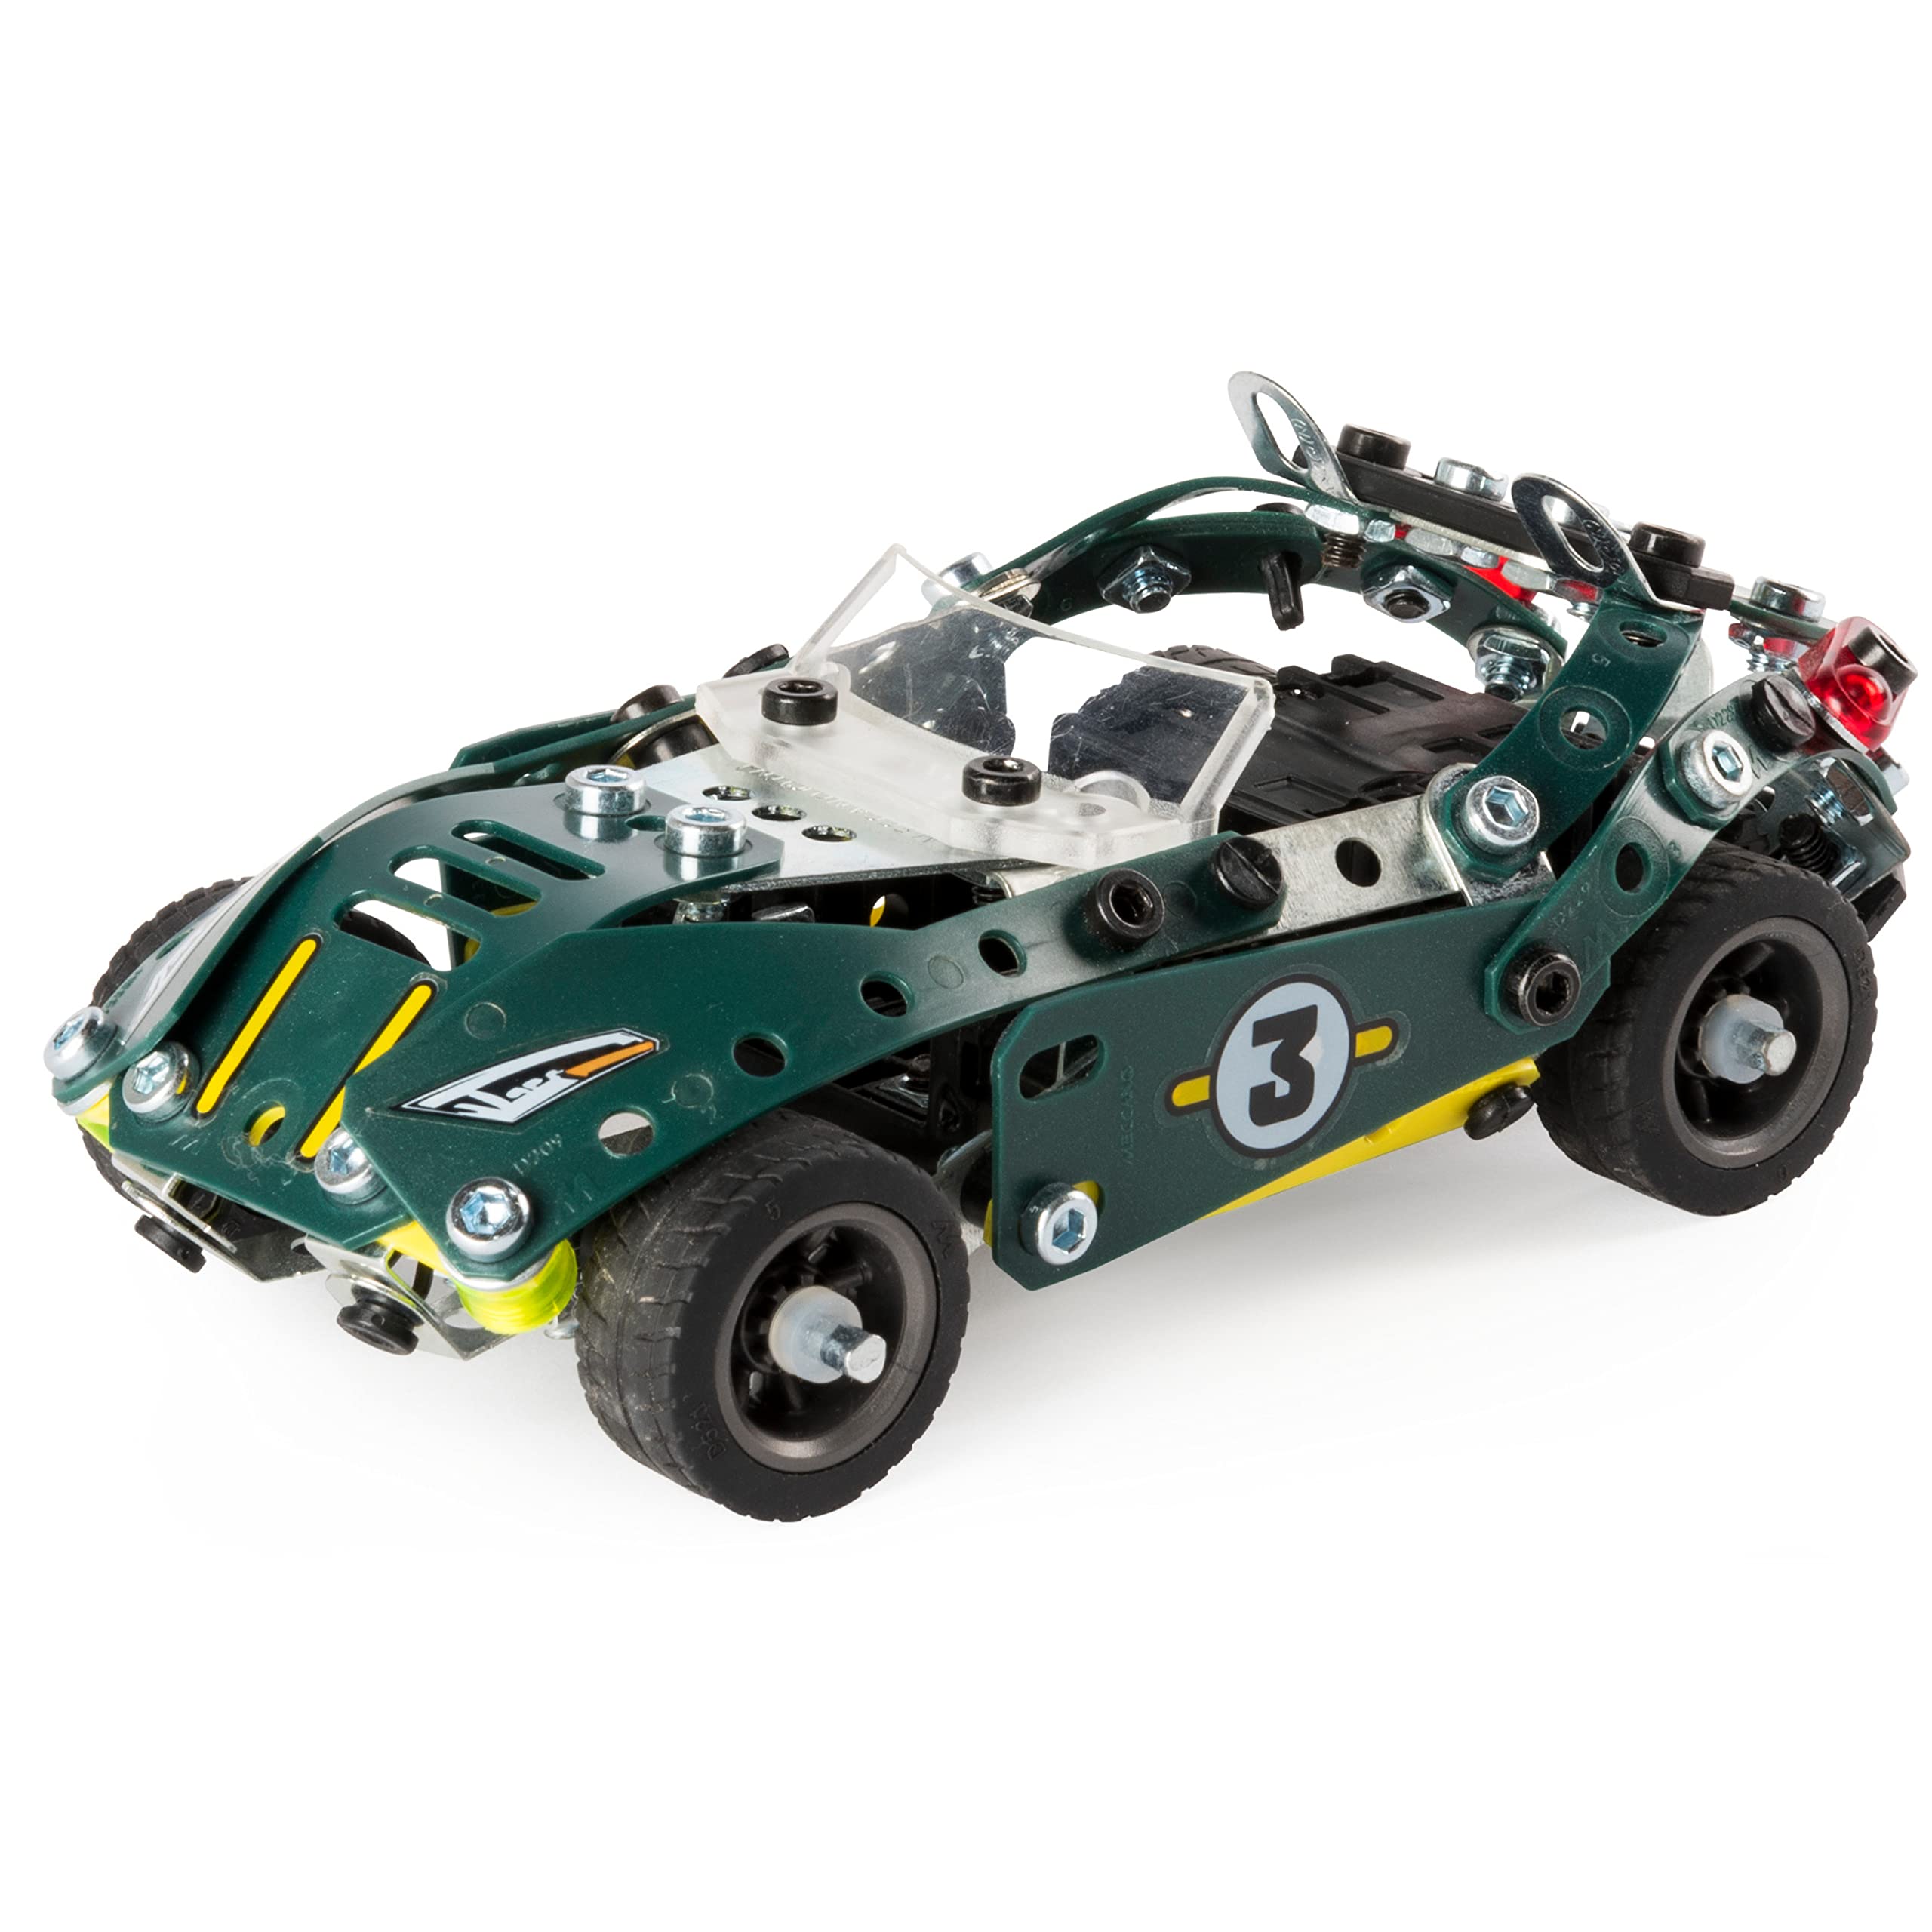 Meccano by Erector 5 in 1 Roadster Pull Back Car Building Kit, STEM Engineering Education Toy for Ages 8 and up